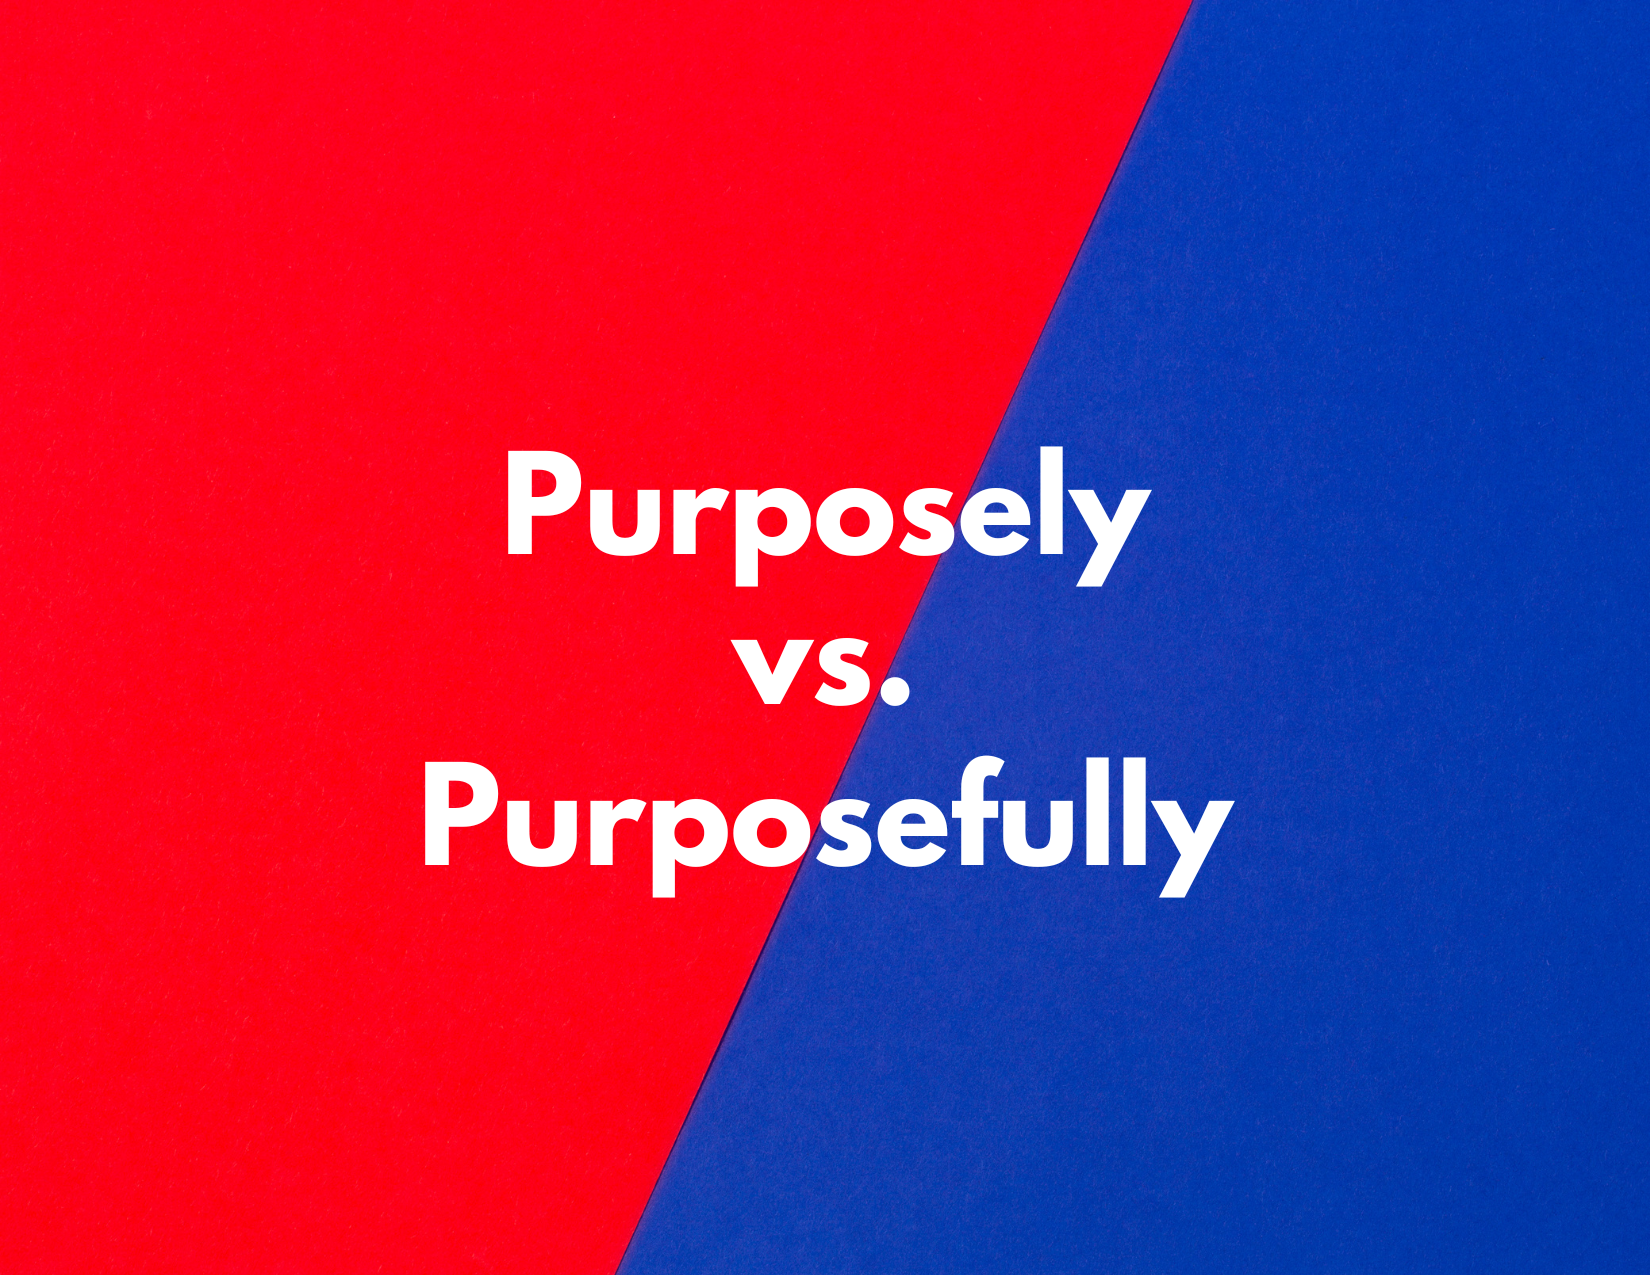 Two Toned Background of Red and Blue with the Words Purposely vs. Purposefully